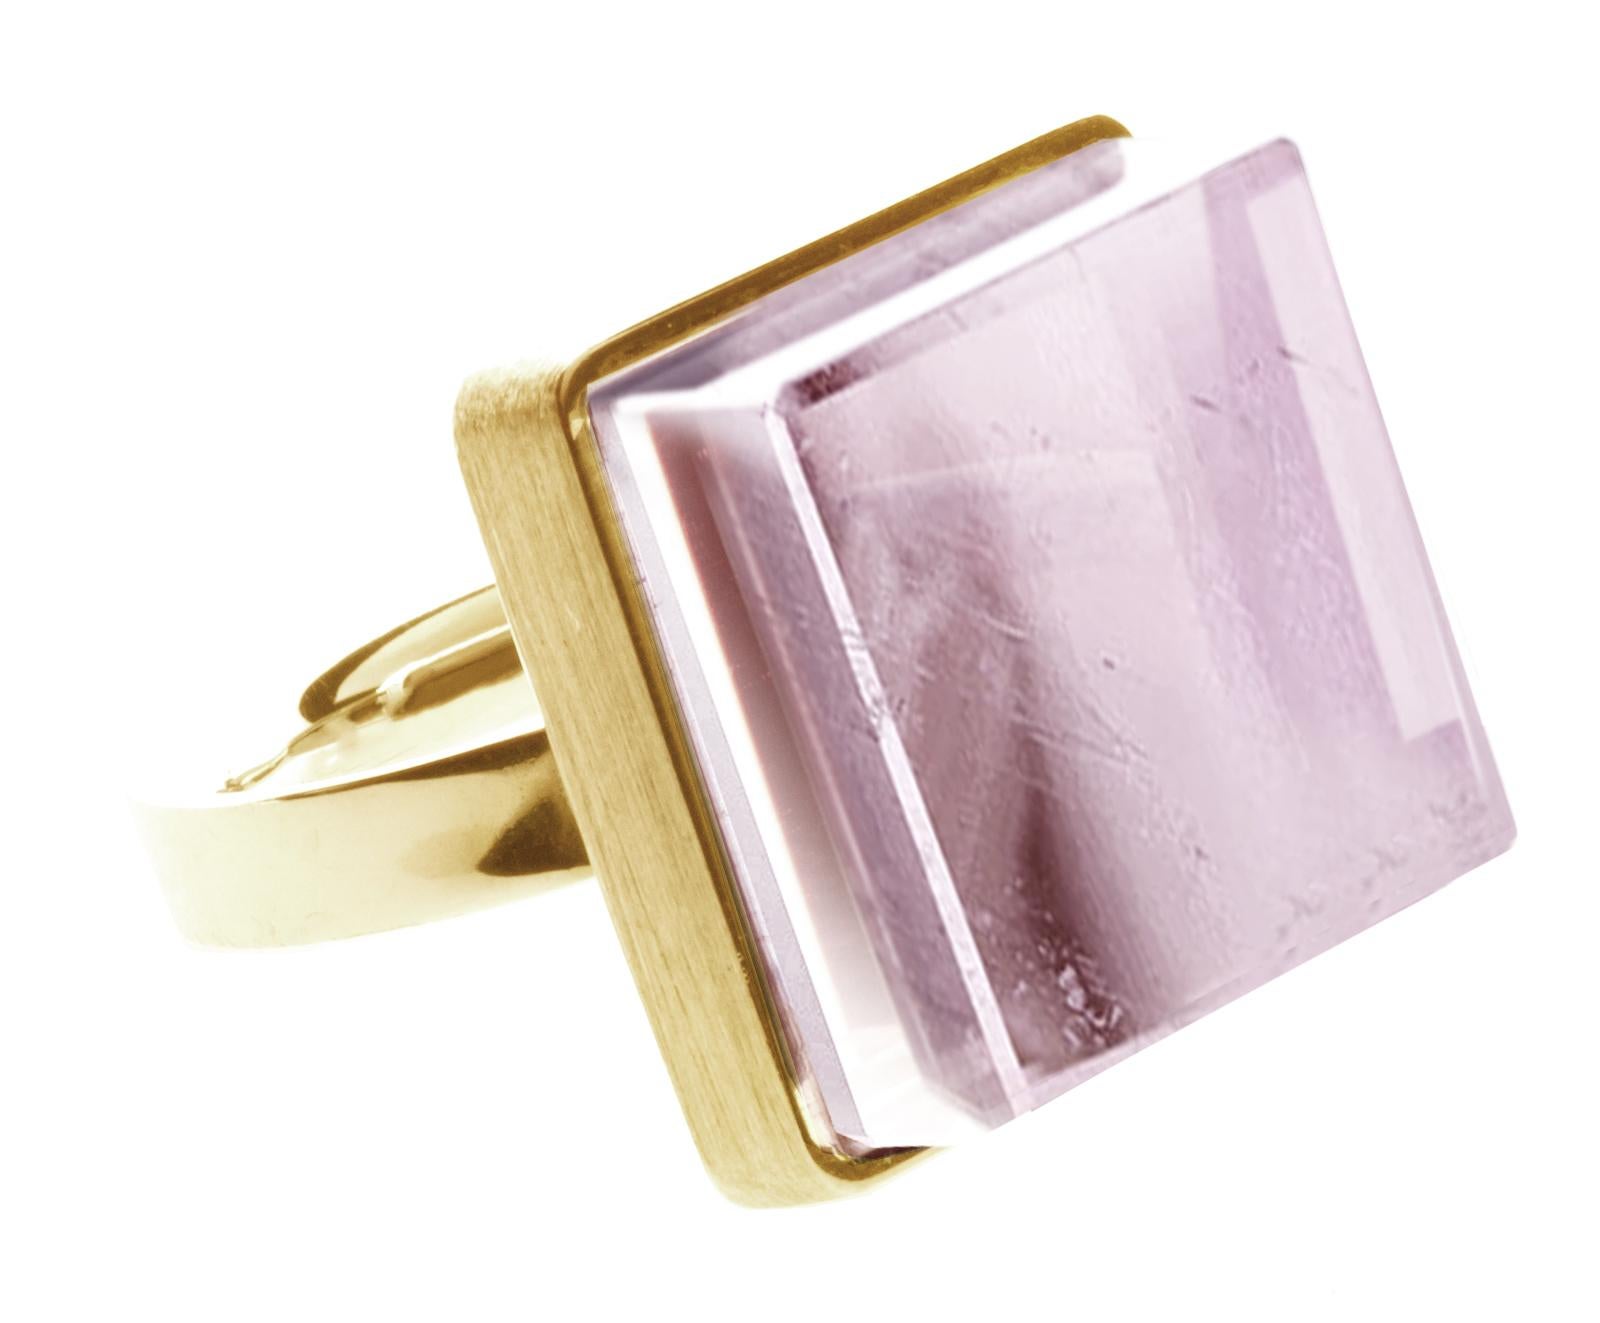 This Art Deco-inspired ring is made of 14 karat rose gold and features a natural pink tourmaline measuring 15x15x8 mm. The ring has been featured in Harper's Bazaar and Vogue UA.

Its design is sure to inspire architects, designers, and artists. The